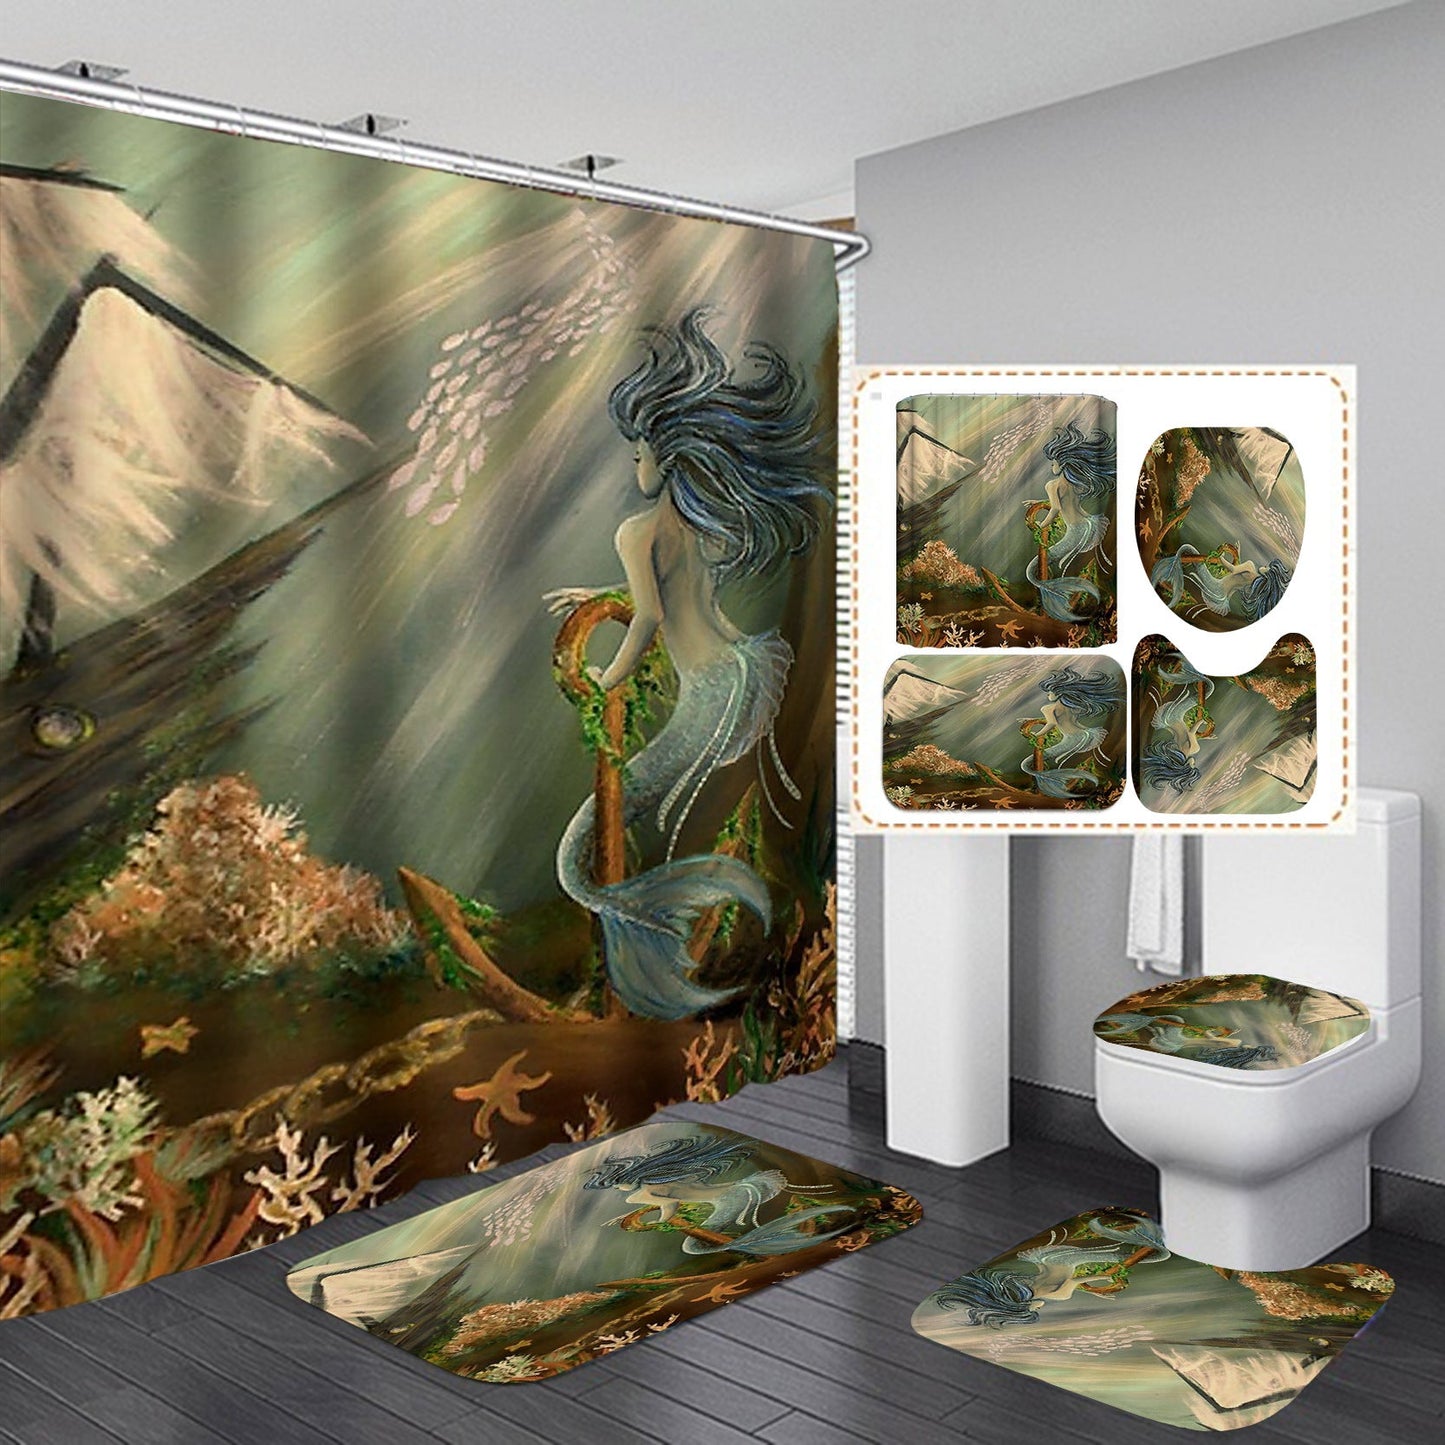 Cartoon Mermaid Design Shower Curtain Bathroom SetsNon-Slip Toilet Lid Cover-Shower Curtain-180×180cm Shower Curtain Only-5-Free Shipping at meselling99